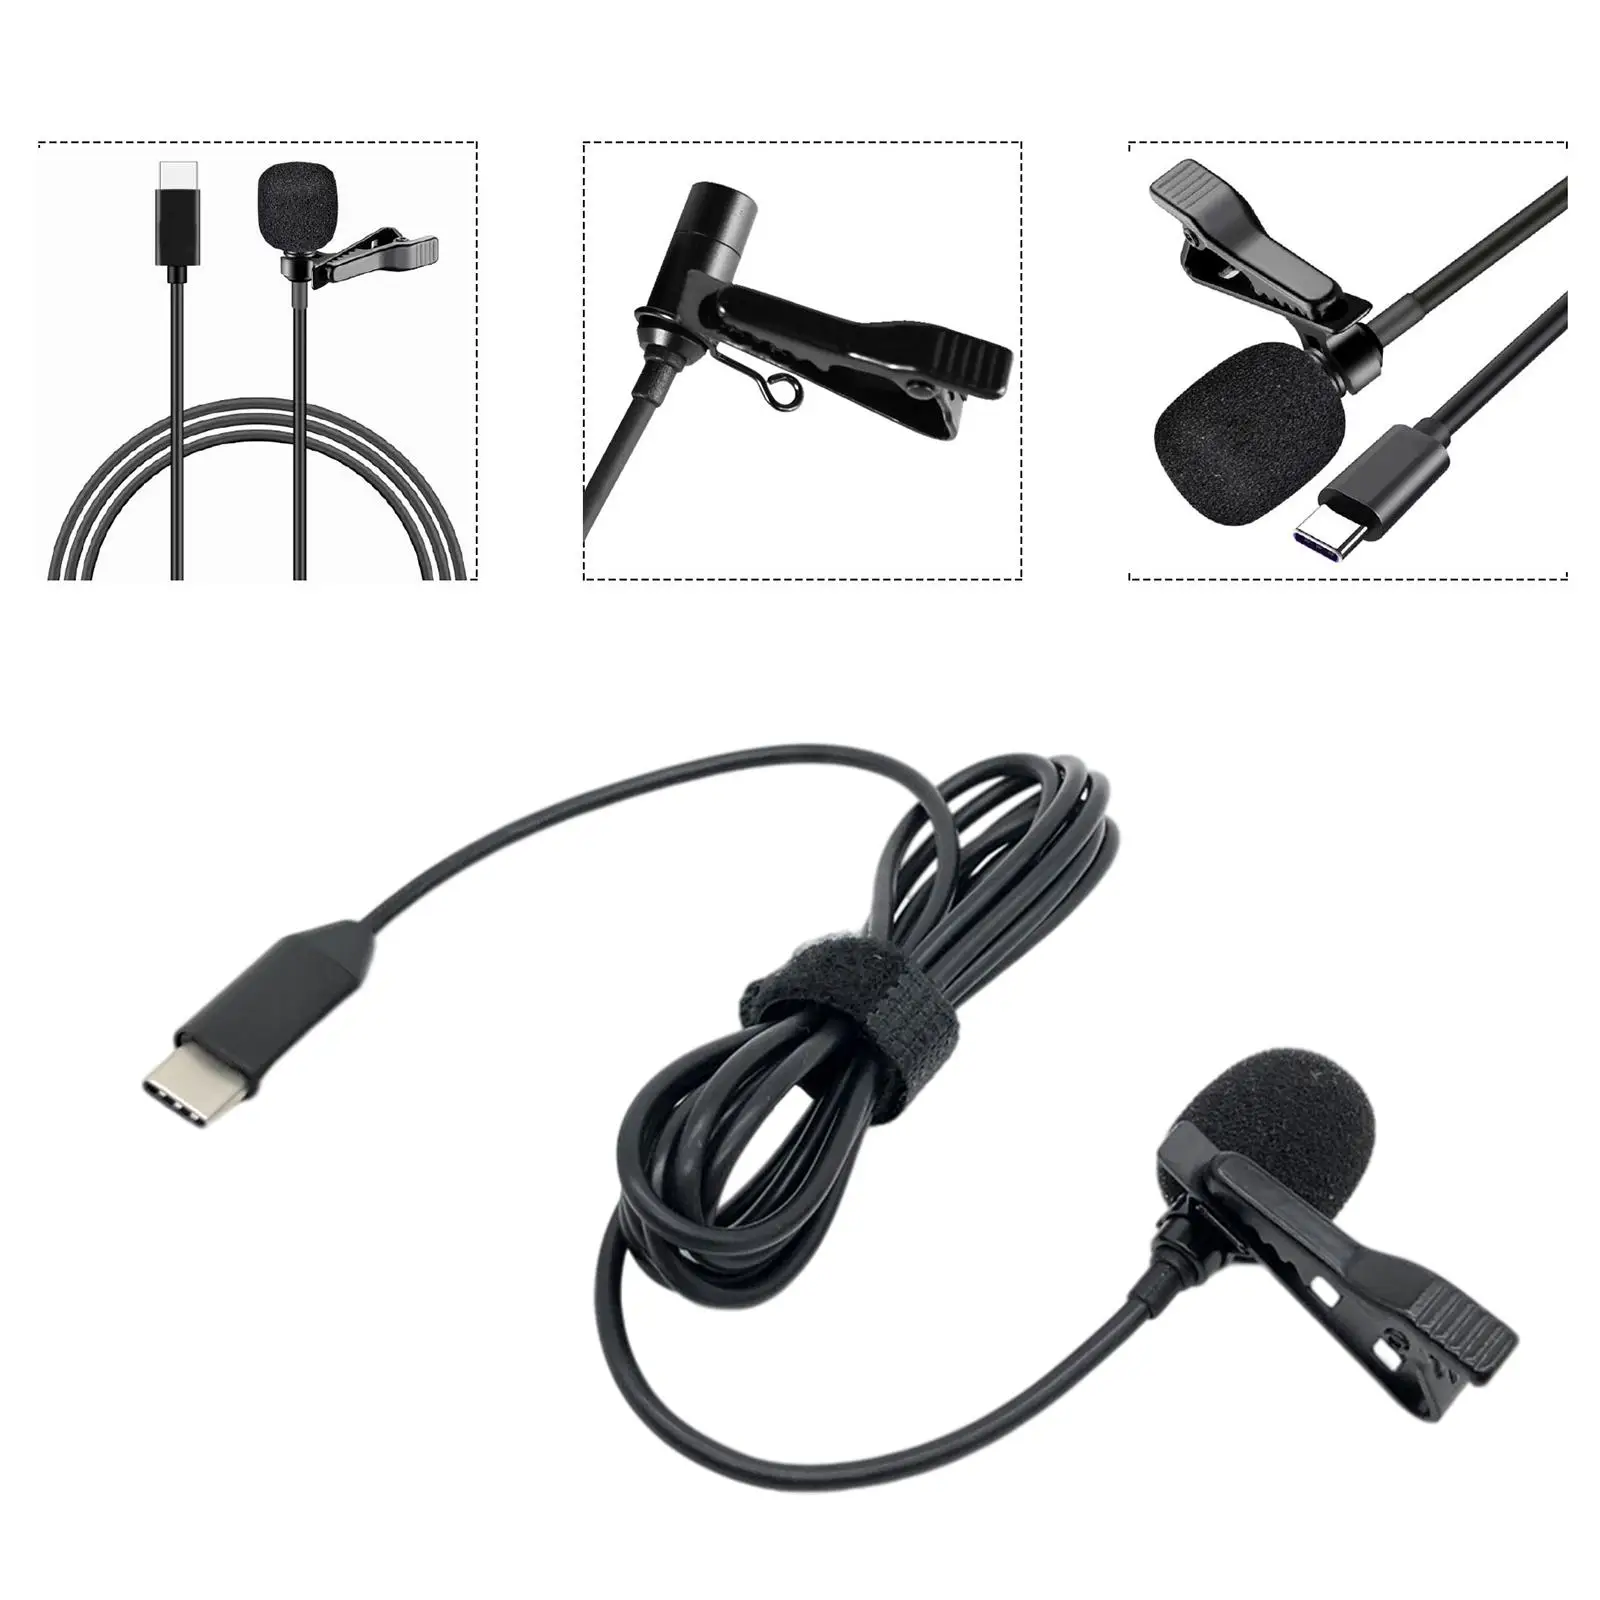 Portable Lavalier Lapel Microphone, Type C with Clip Pro Audio Mic Omnidirectional HiFi Sound, Sport Camera Vlogger Video Vlog